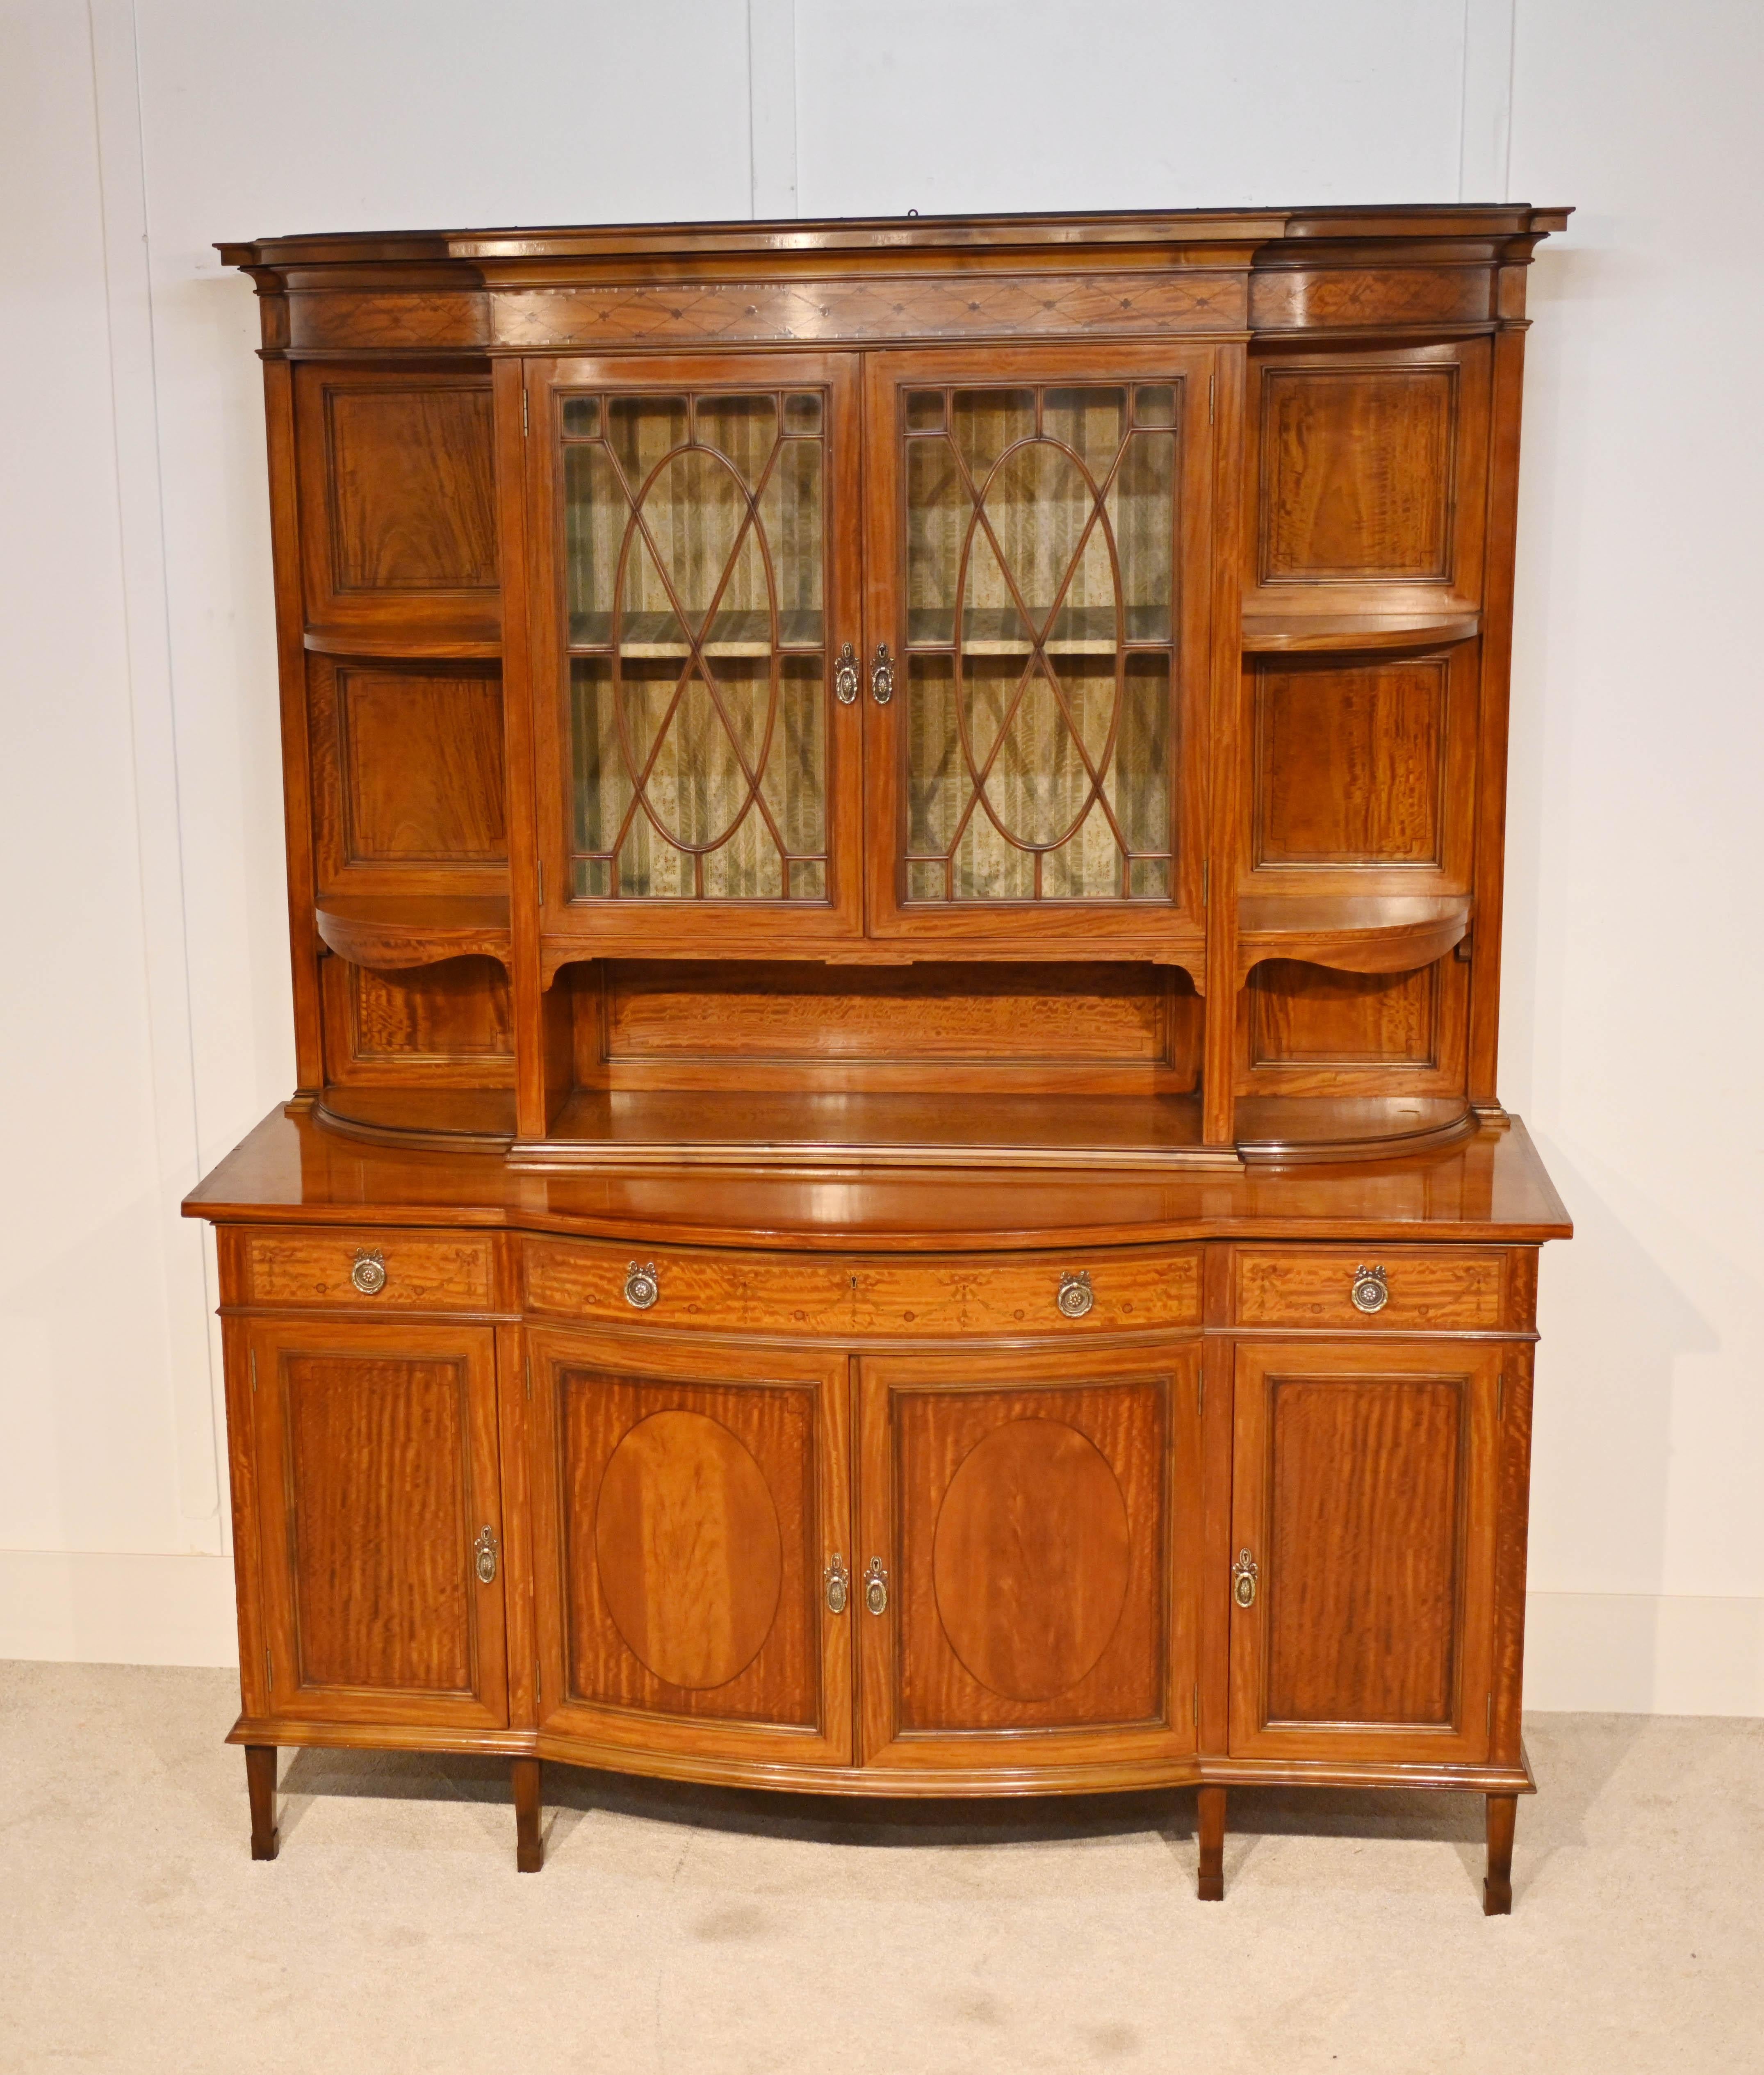 Large Edwardian side cabinet or kitchen buffet in satinwood
Circa 1910 and by Maple and Co who were famous London furniture makers
Very clean and minimal design, perfect for modern interiors
Centre top section is glass covered for display